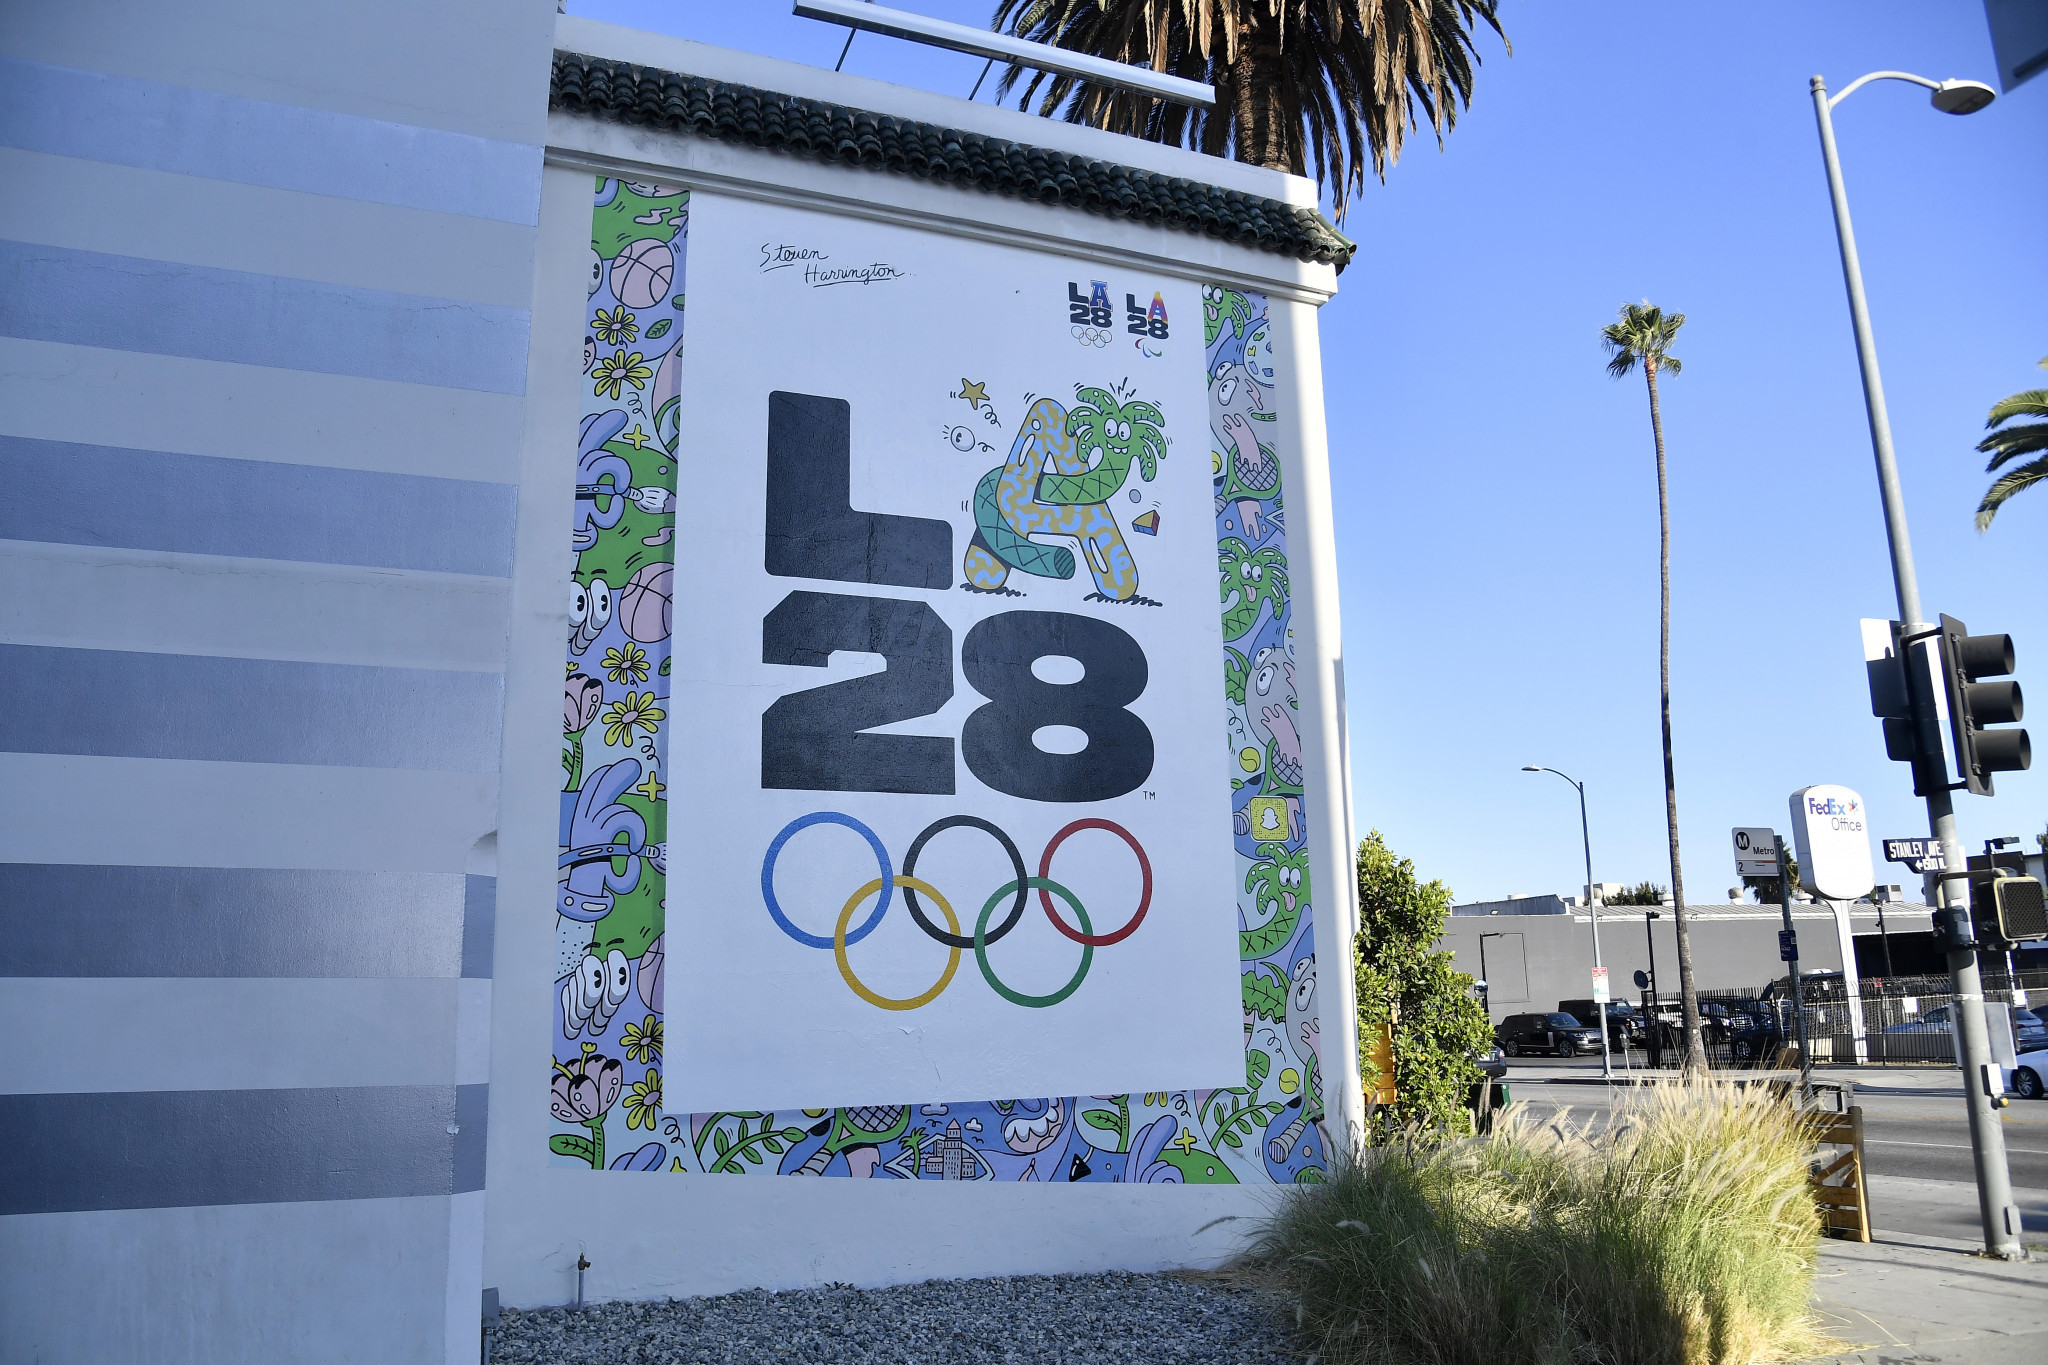 Los Angeles 2028 is set to be the third time the city has hosted the Olympic Games, after the 1932 and 1984 editions ©Getty Images